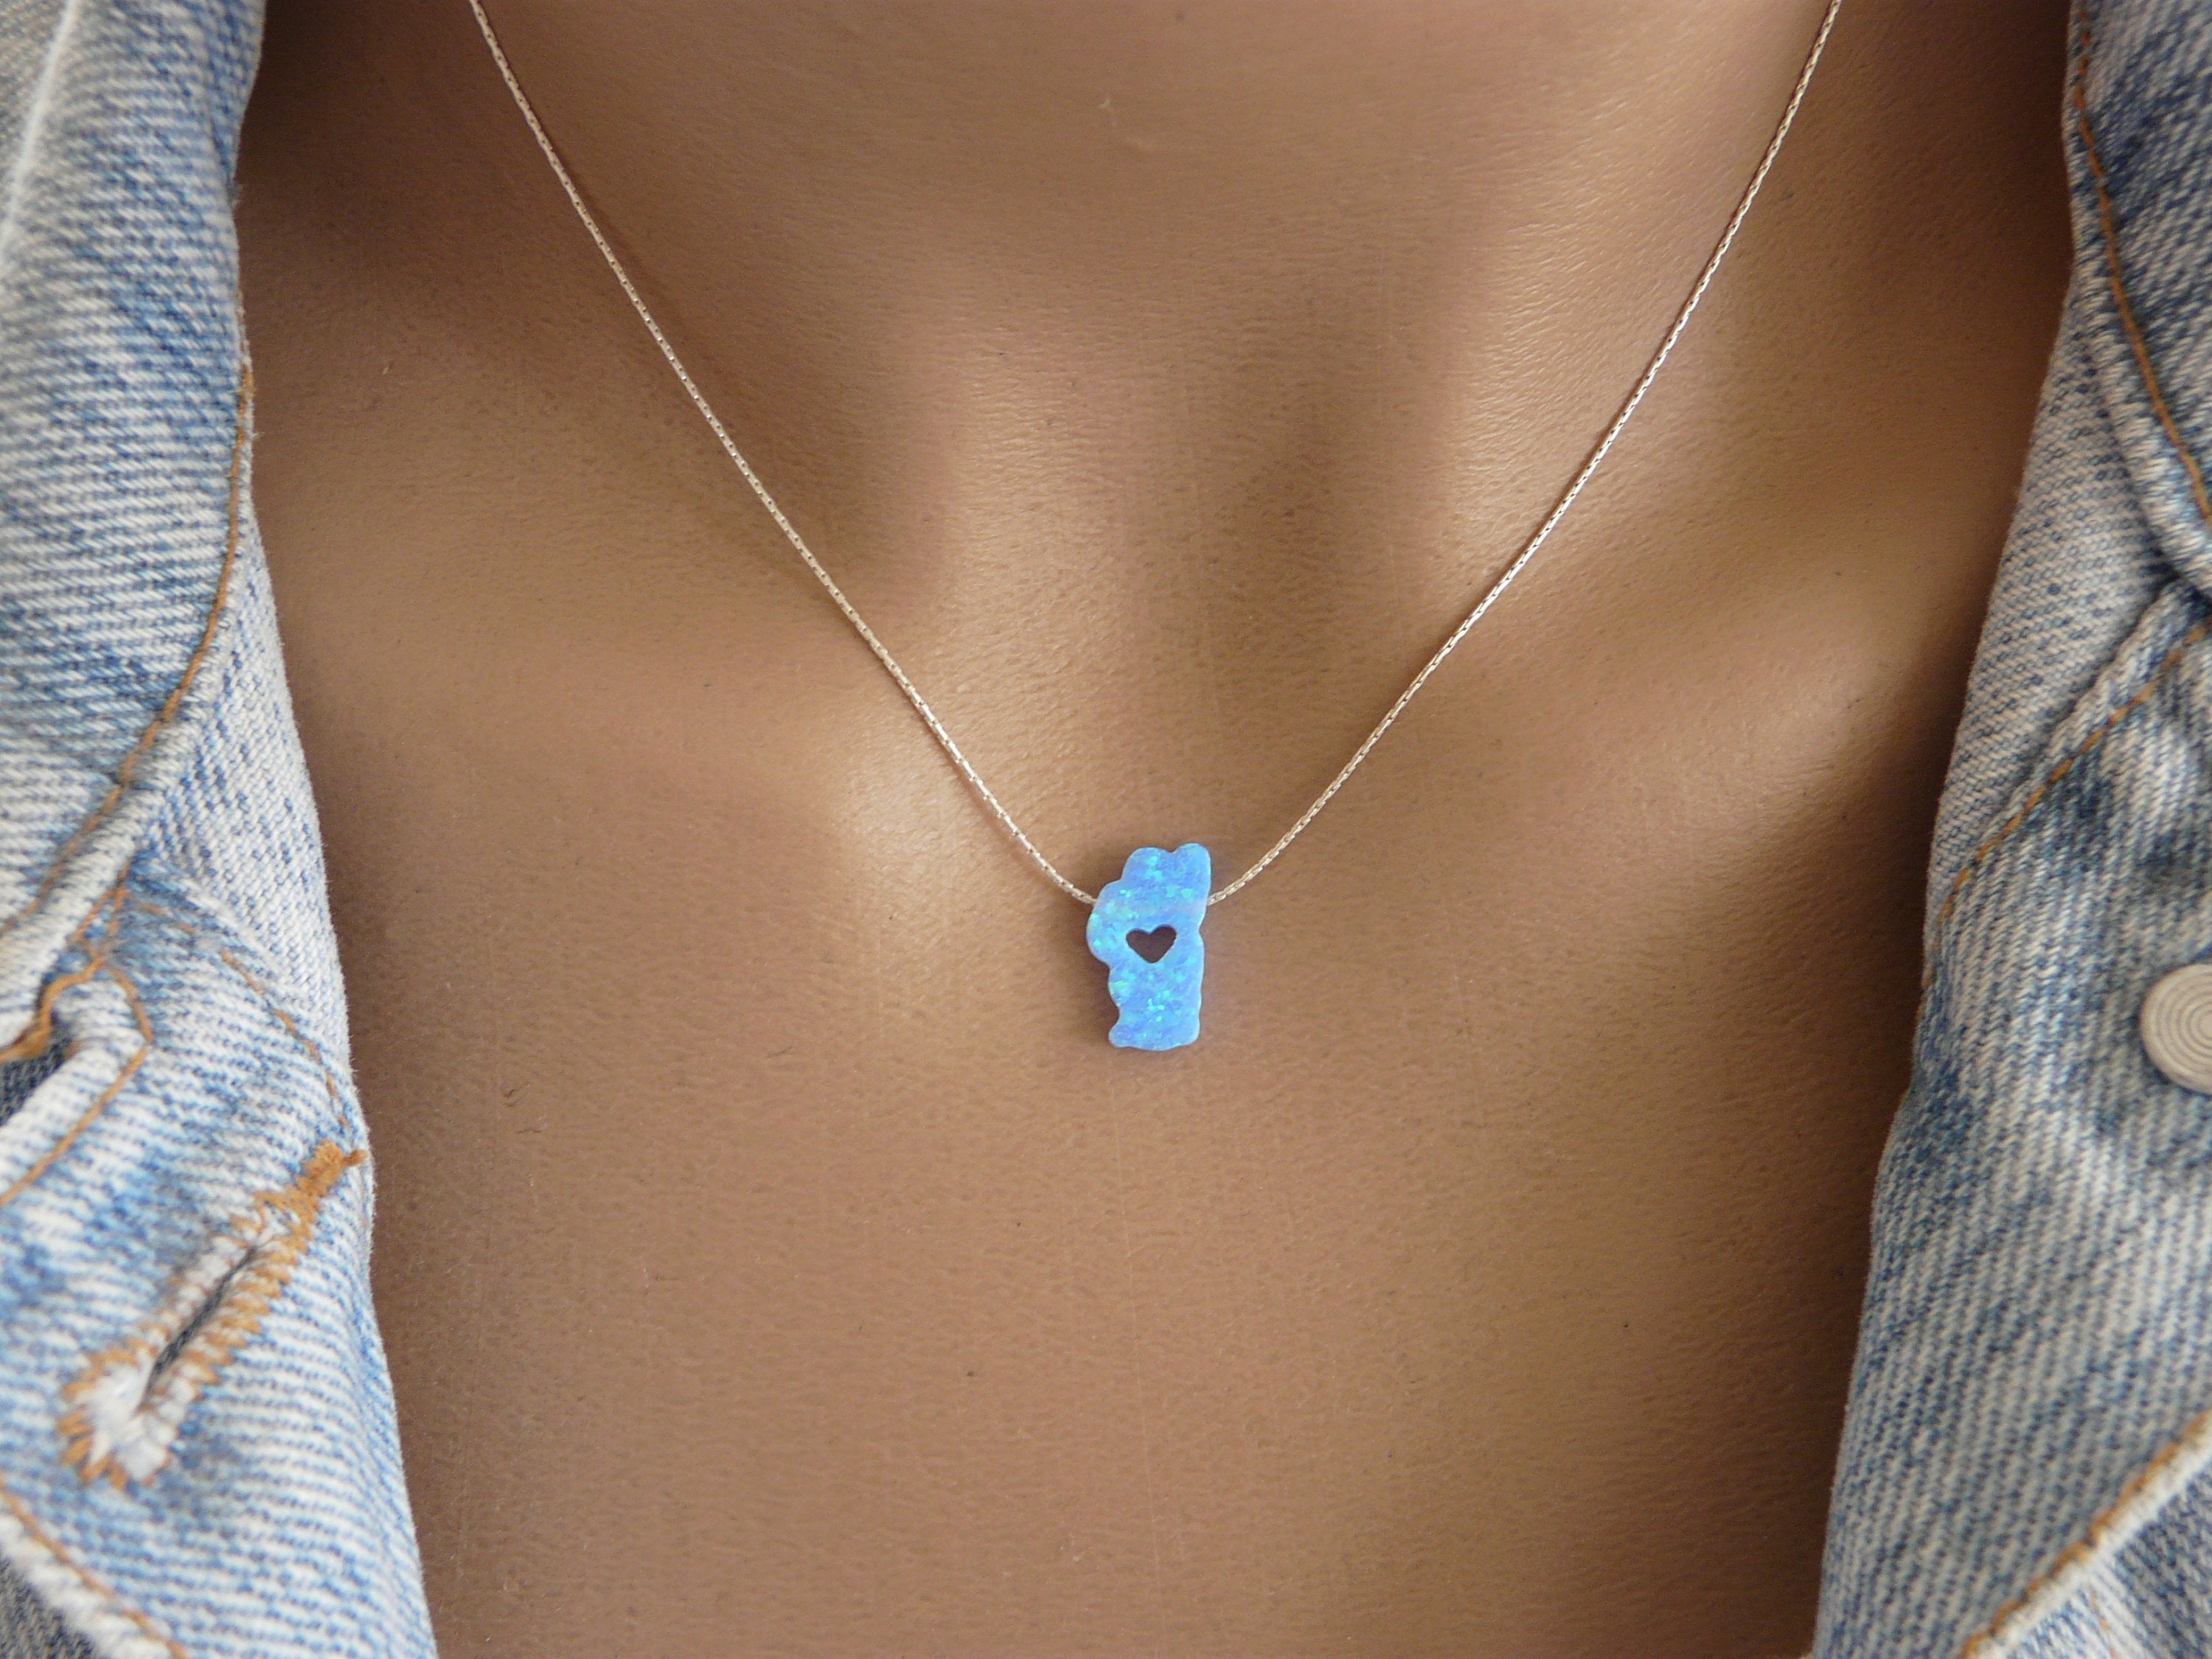 Heart of Tahoe necklace